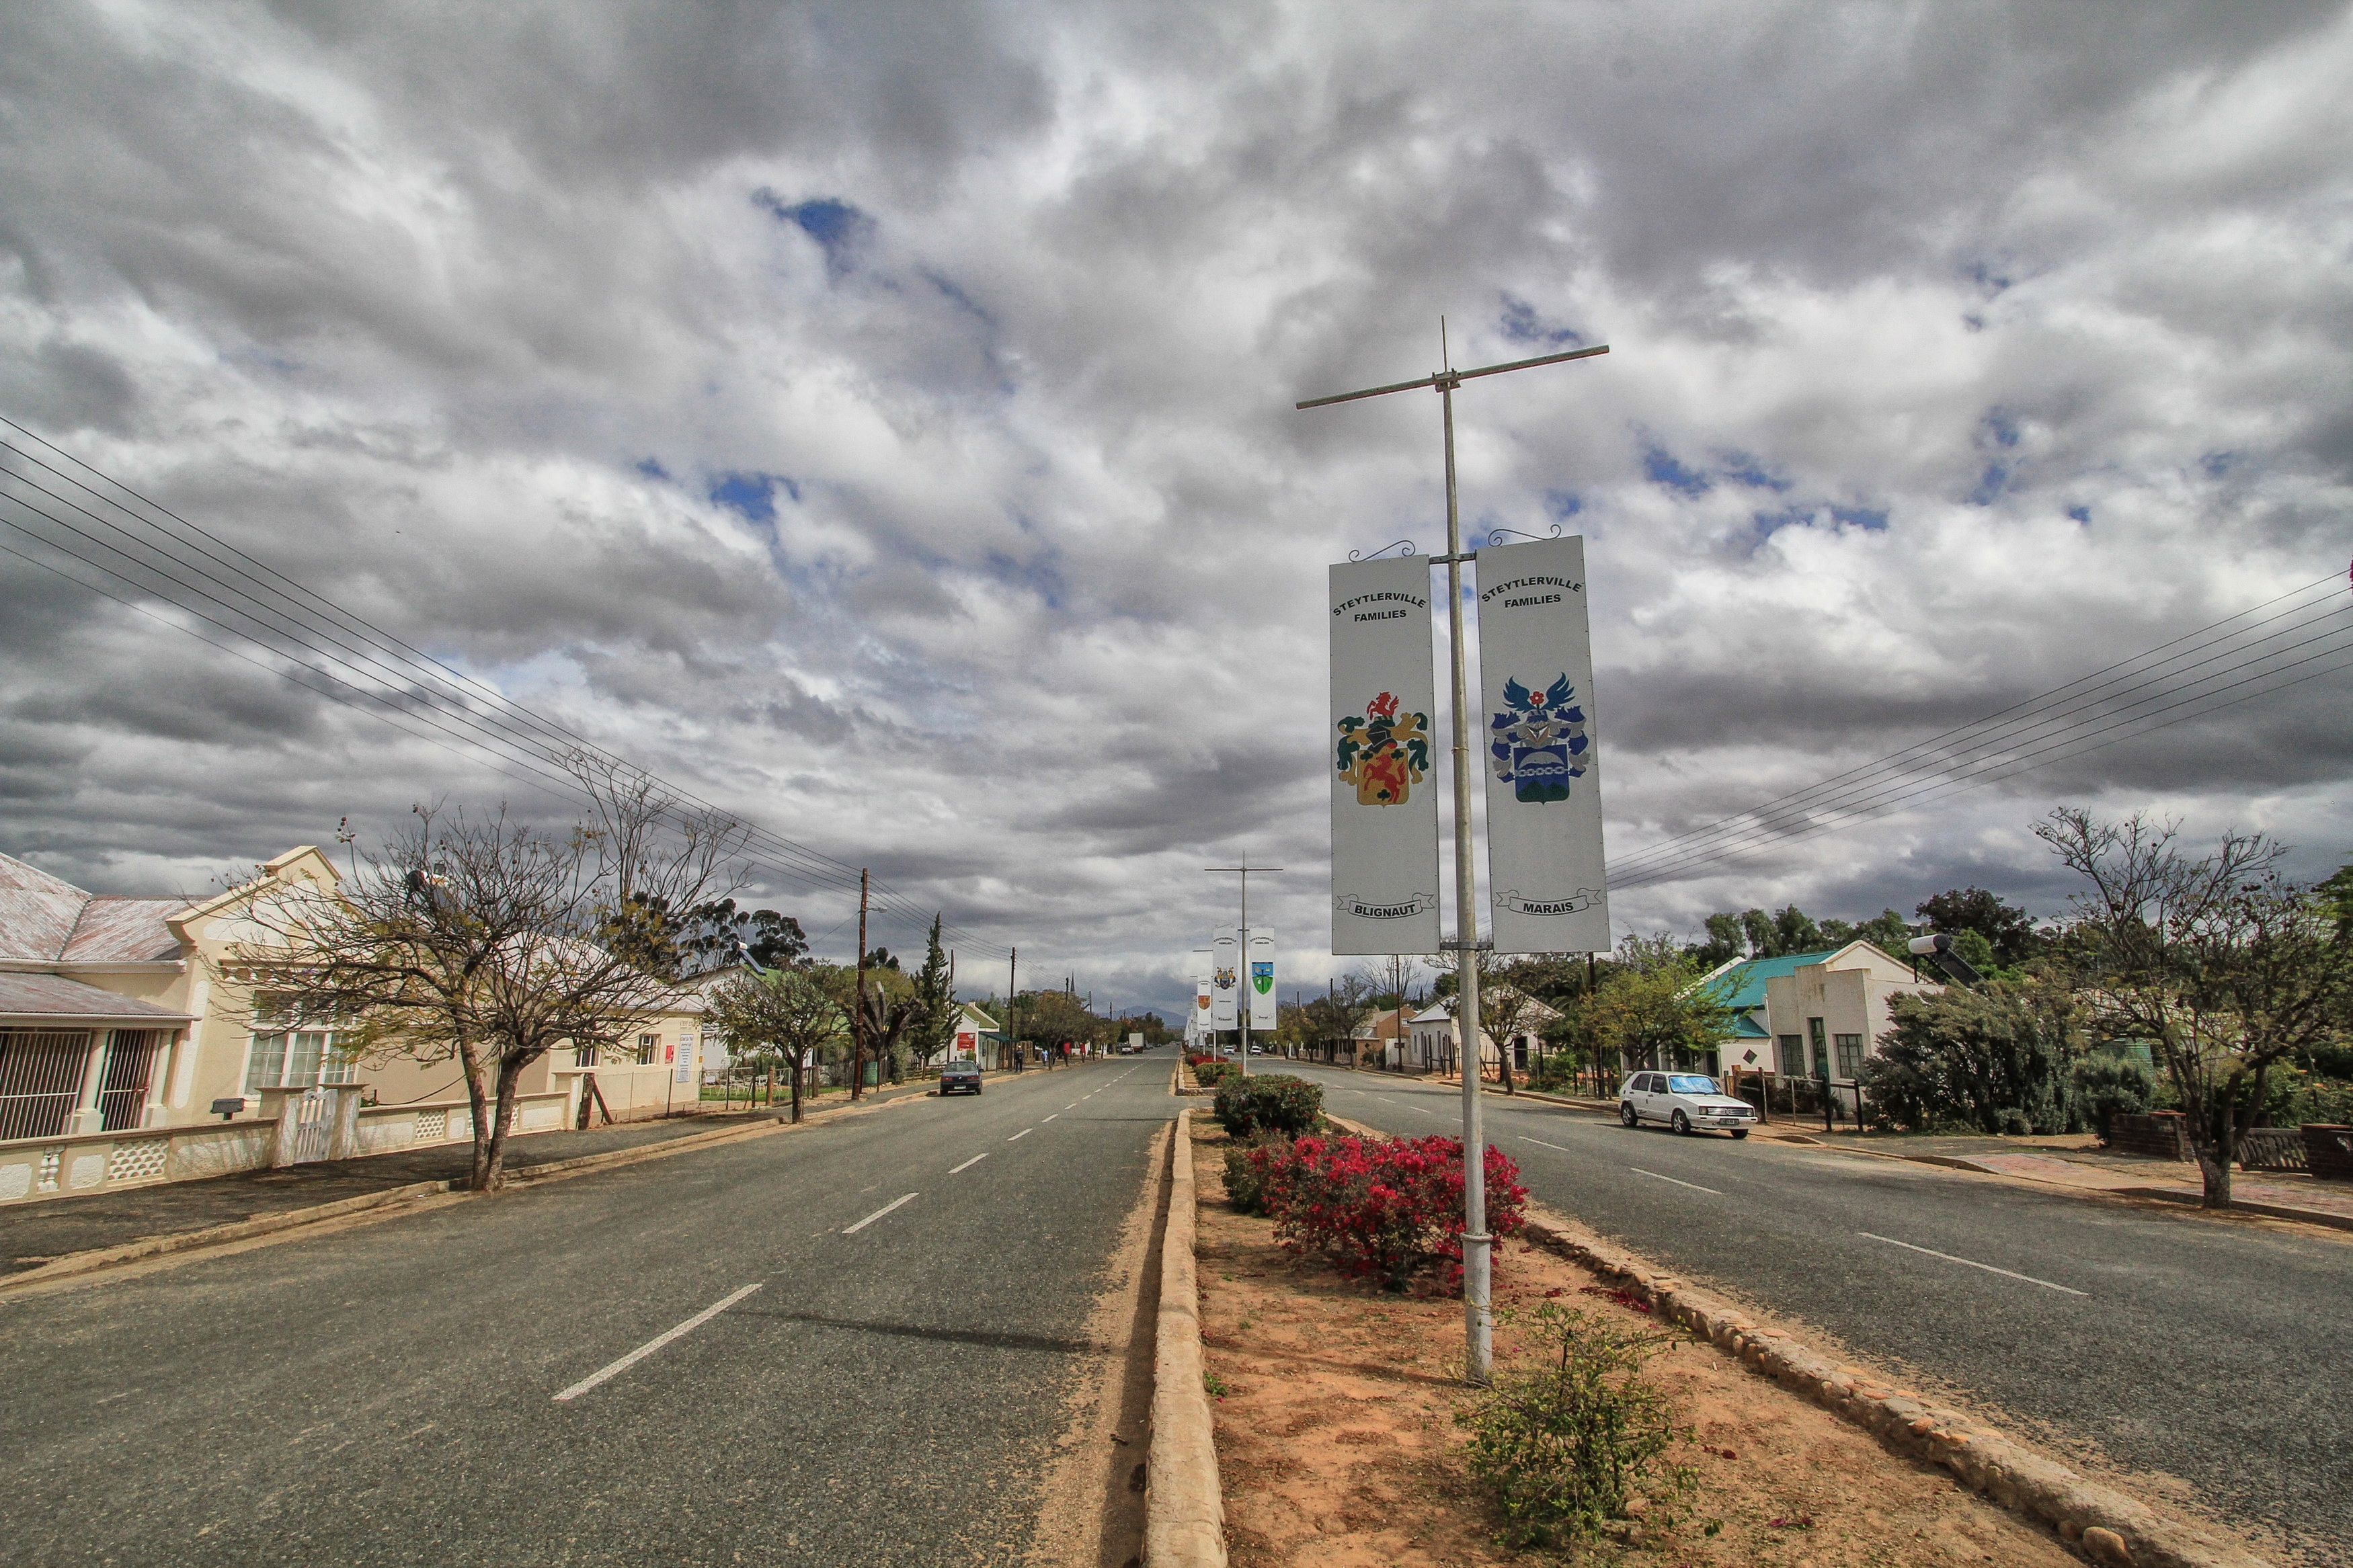 One of the widest main streets in South Africa is to be found in Steytlerville. Image: Chris Marais